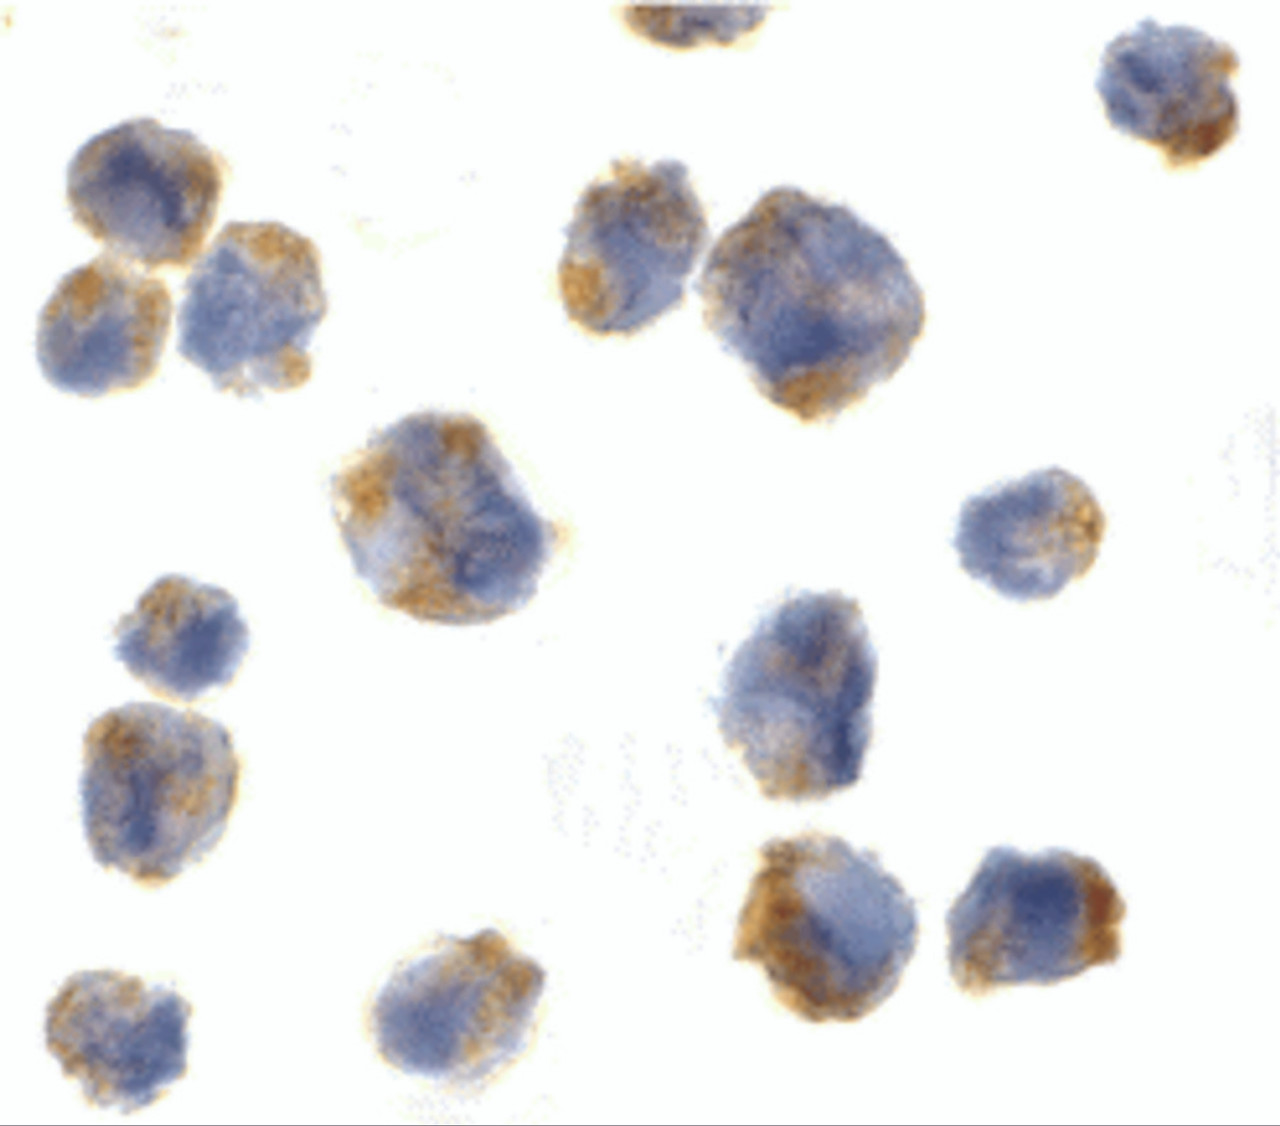 Immunocytochemistry of Eotaxin in 293 cells with Eotaxin antibody at 5 &#956;g/mL.